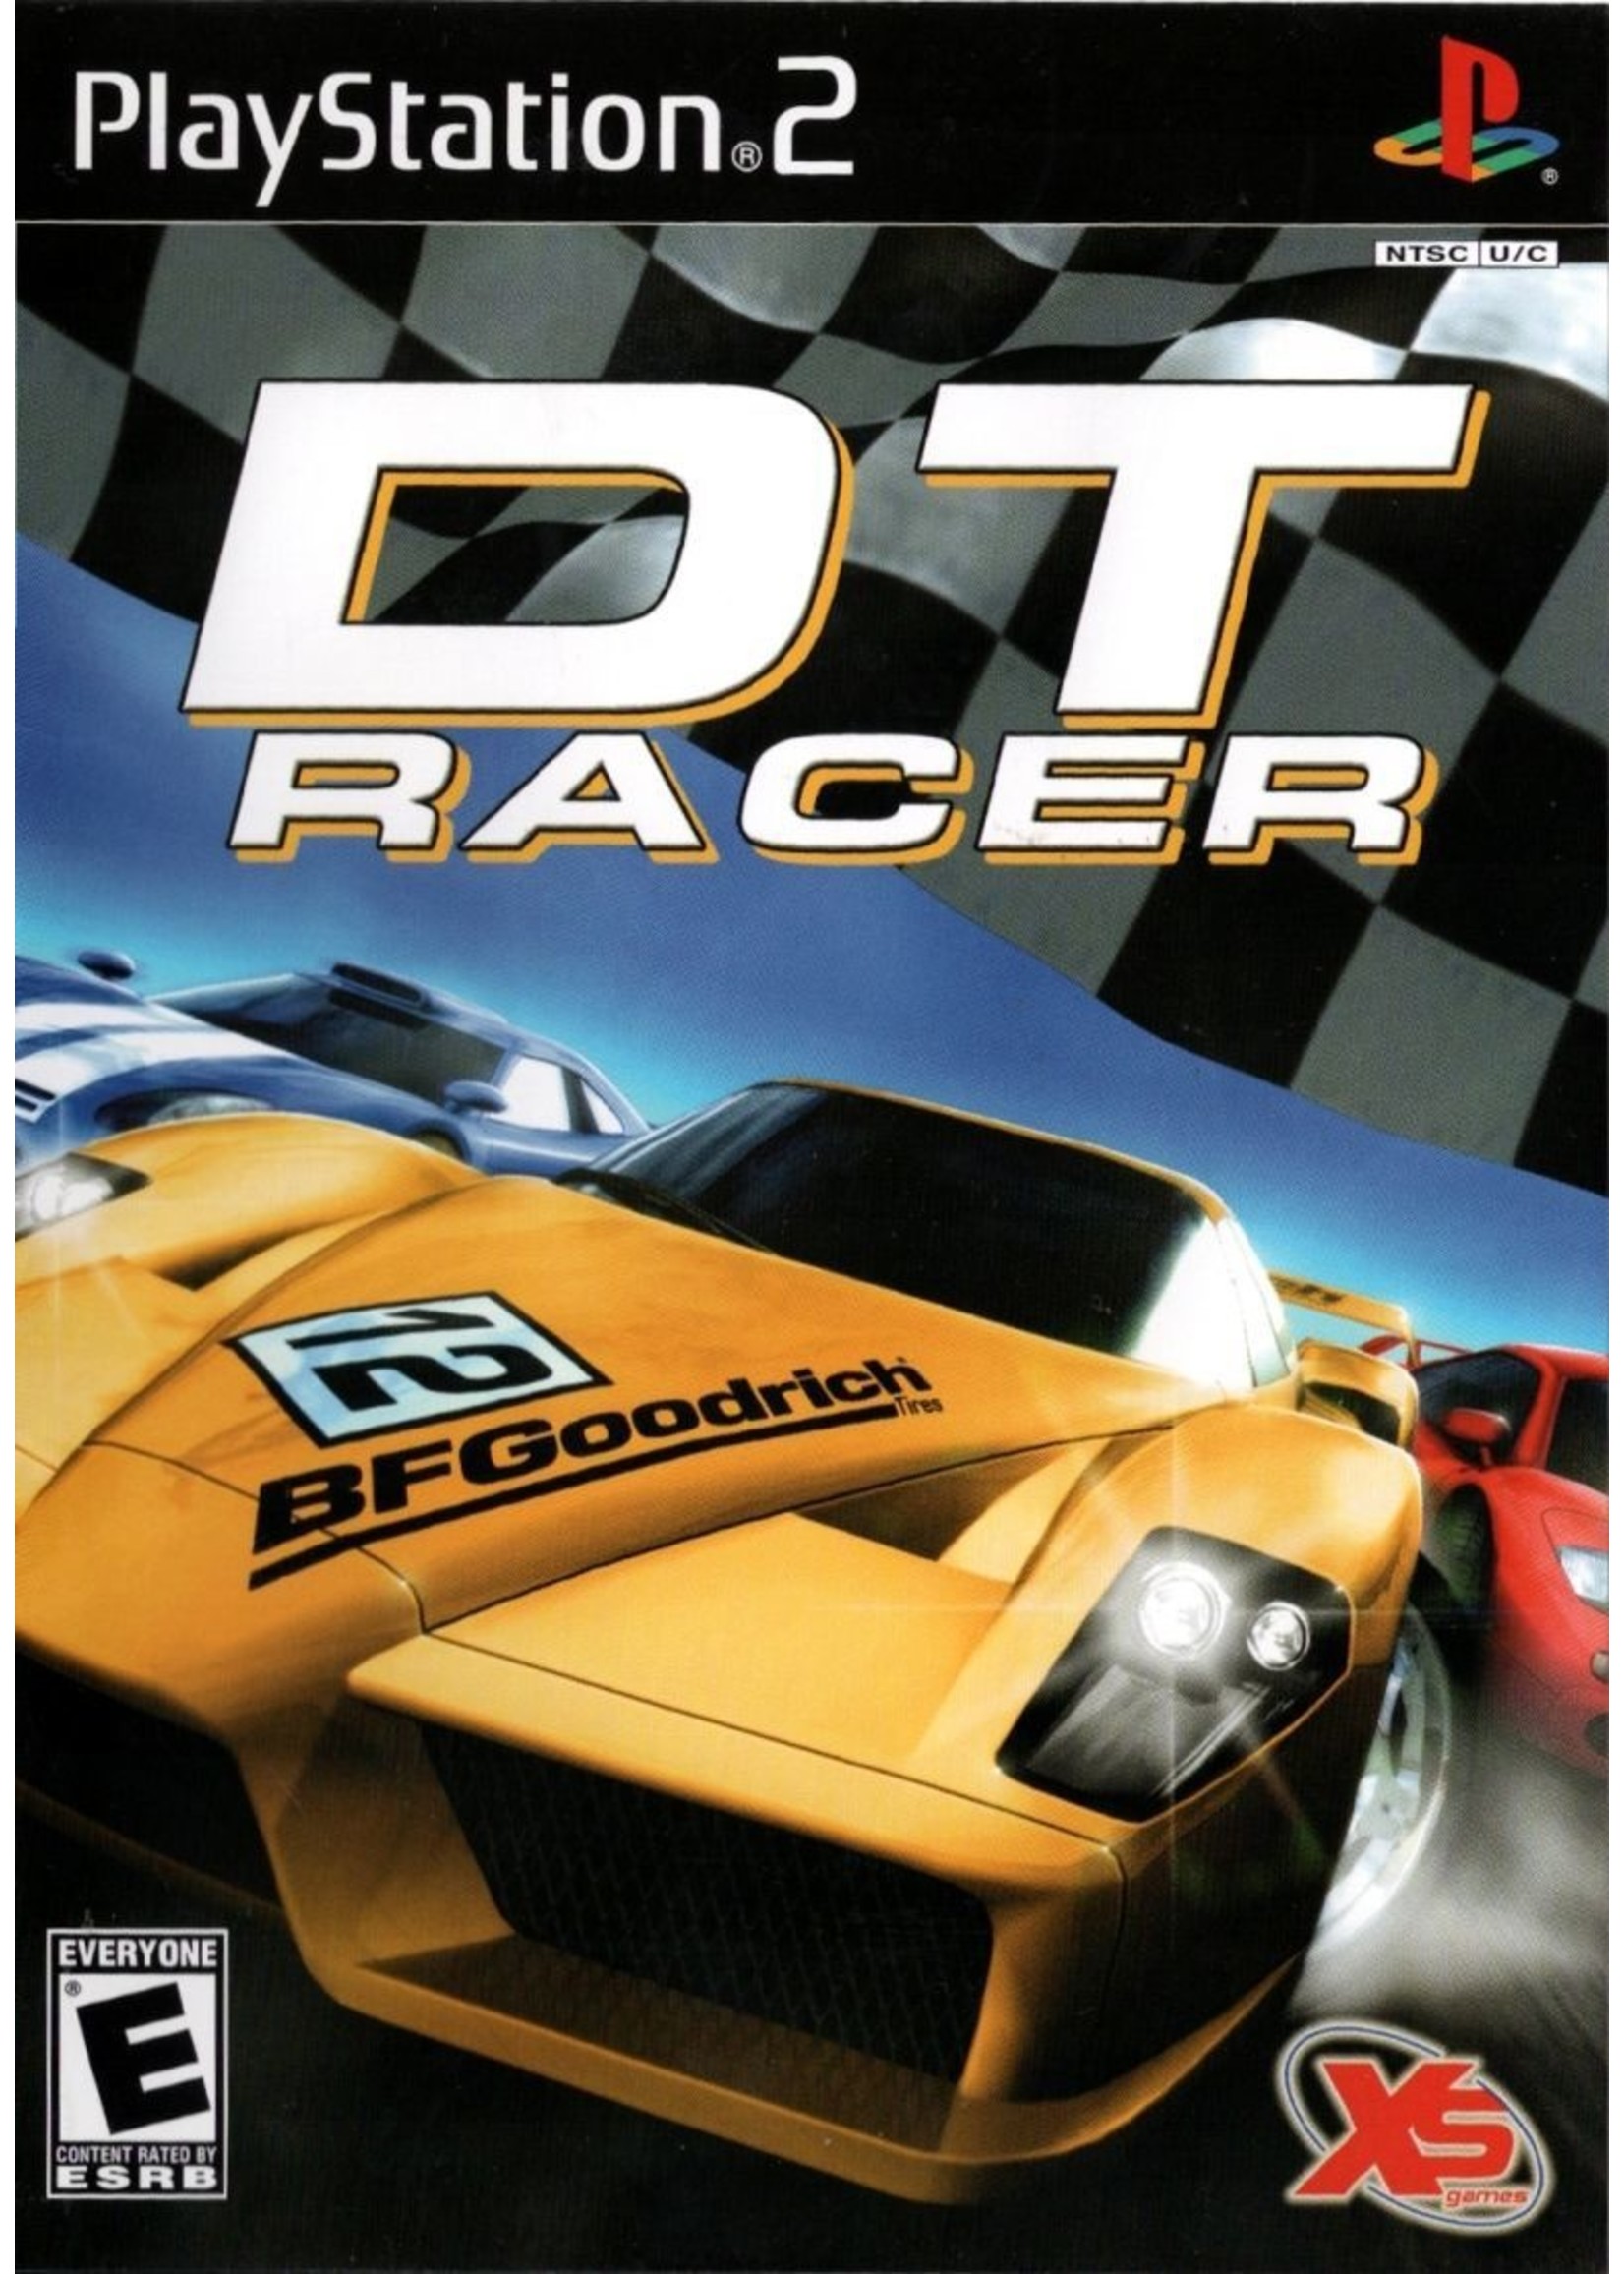 Sony Playstation 2 (PS2) DT Racer